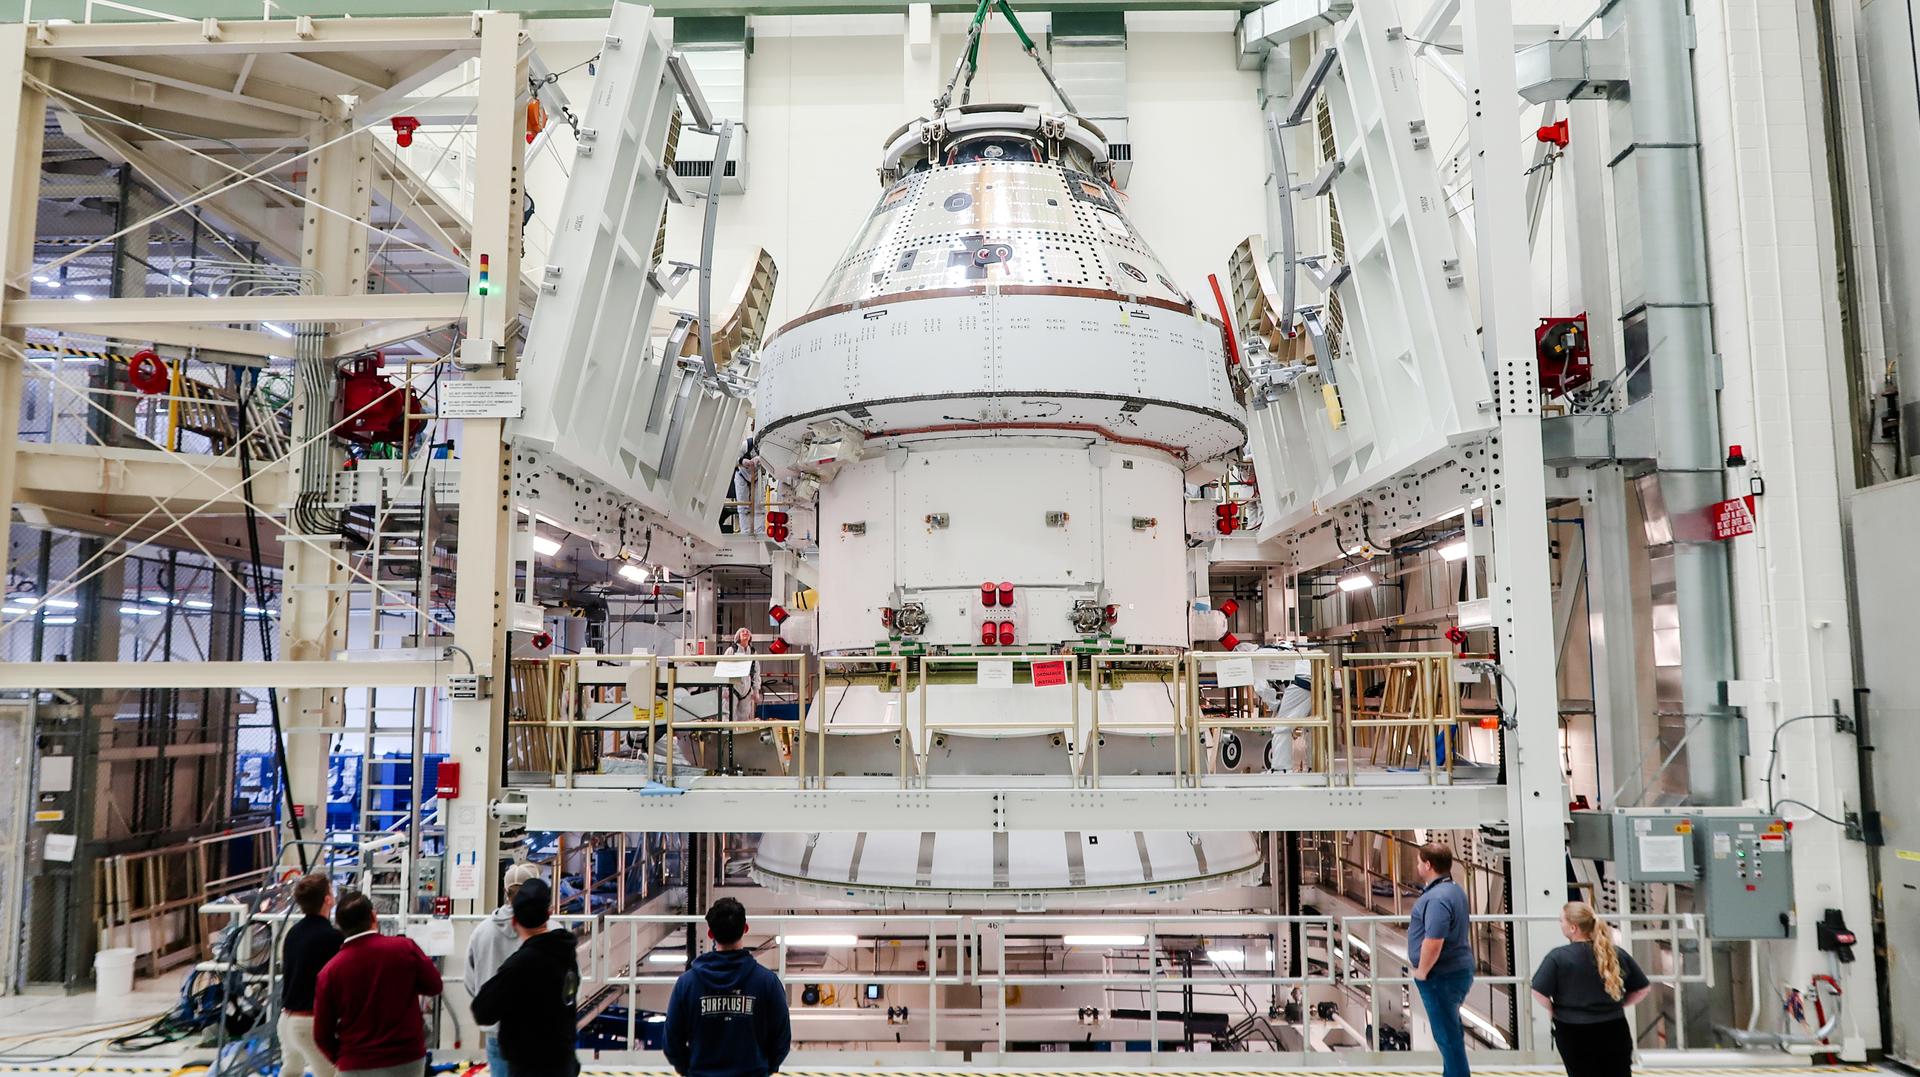 Artemis 2 Orion spacecraft starts testing ahead of moon mission with astronauts in 2025 (video) Space